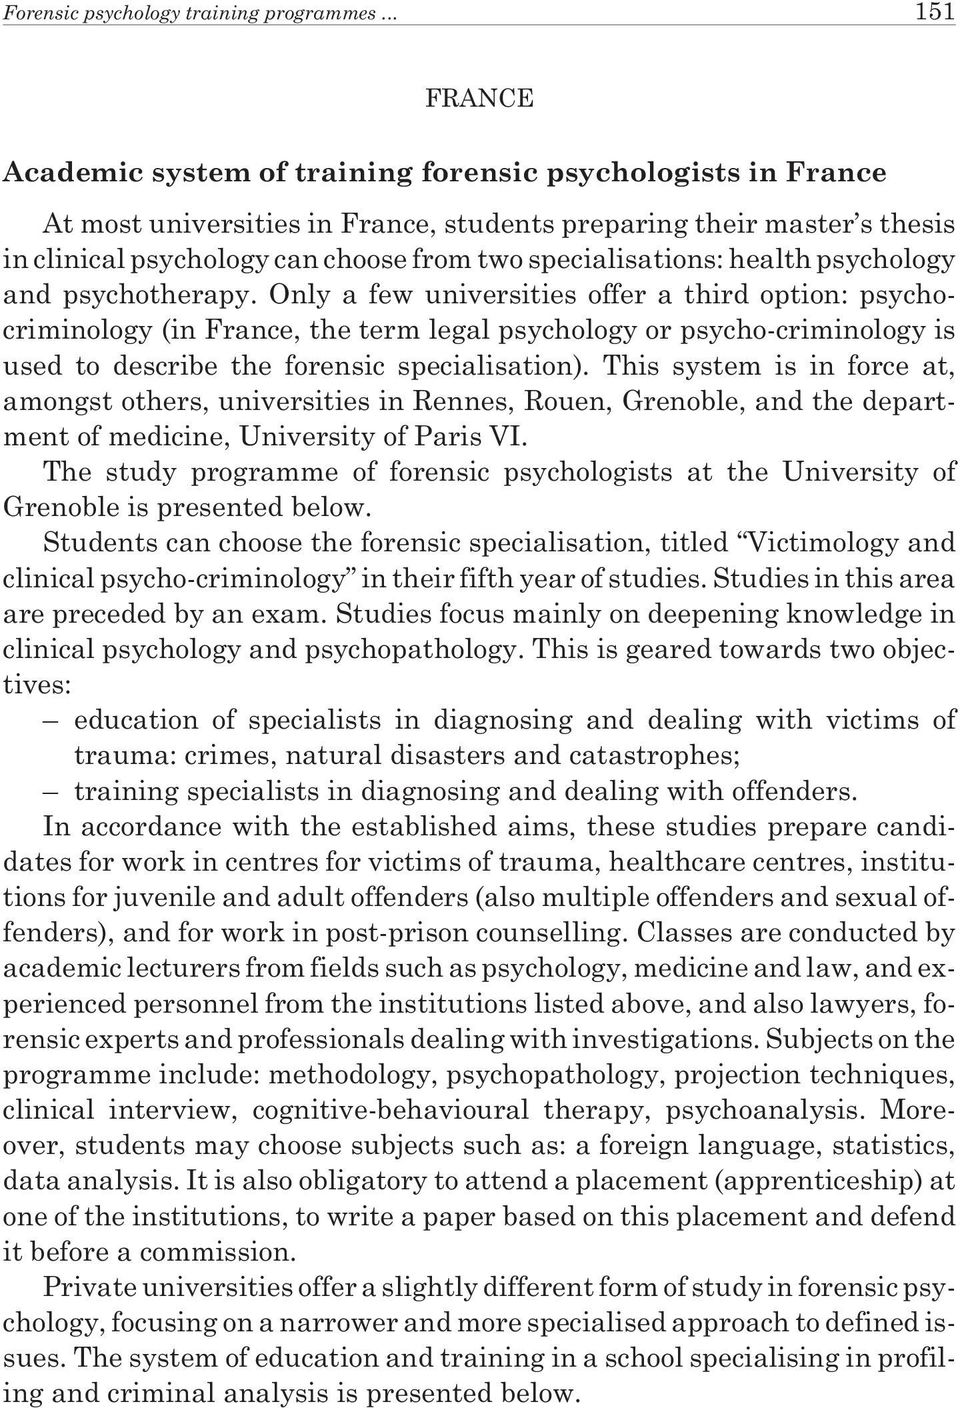 specialisations: health psychology and psychotherapy.